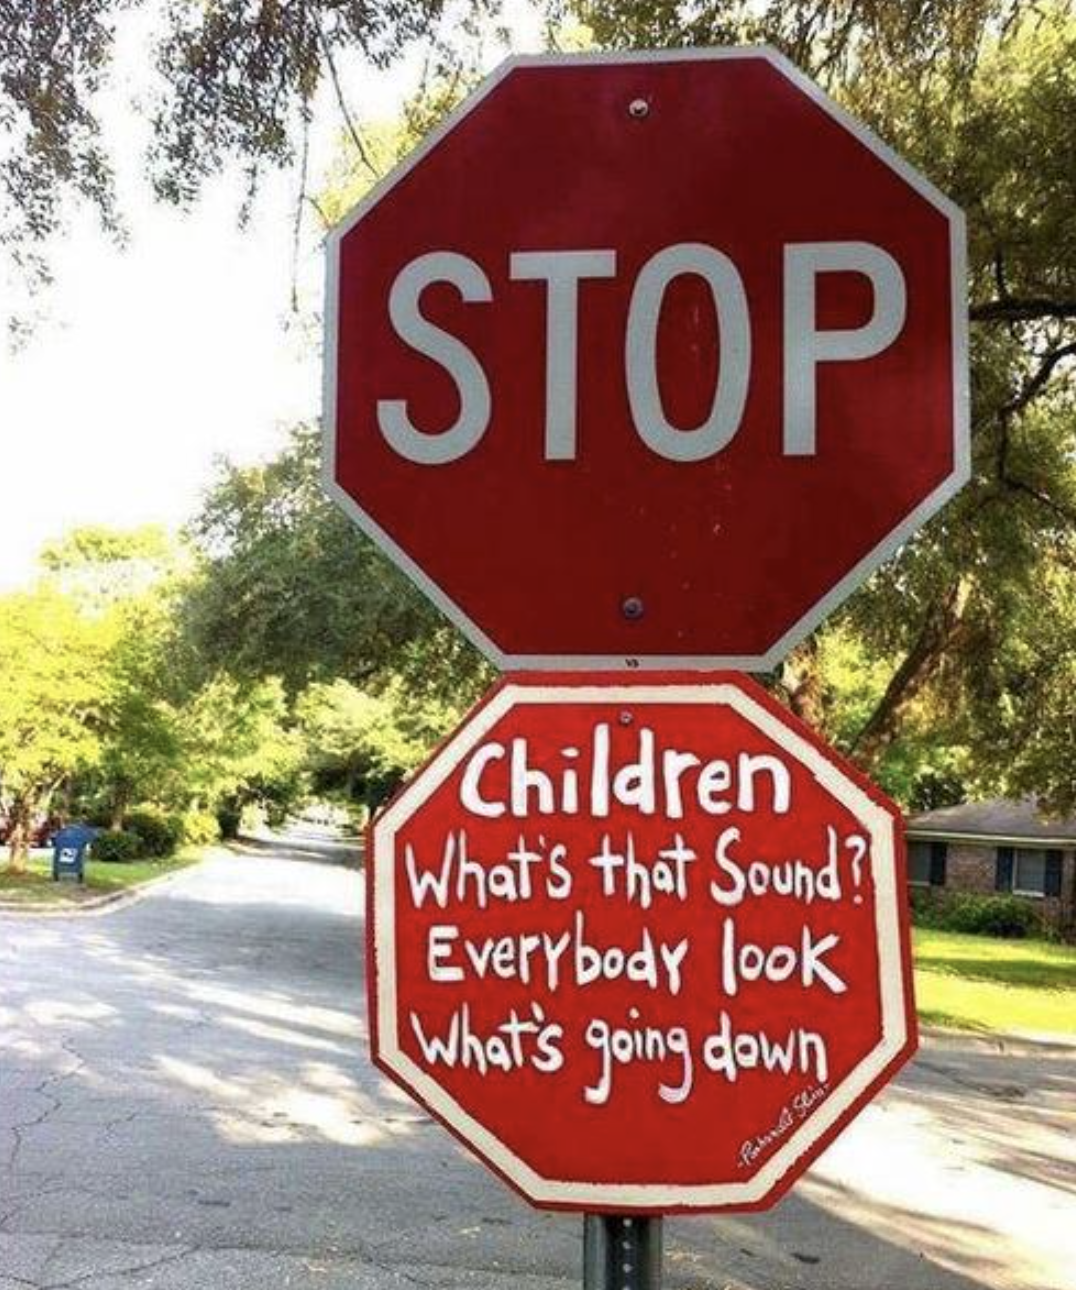 Stop sign with added text &quot;Children What&#x27;s that Sound? Everybody look What&#x27;s going down&quot; on a tree-lined street